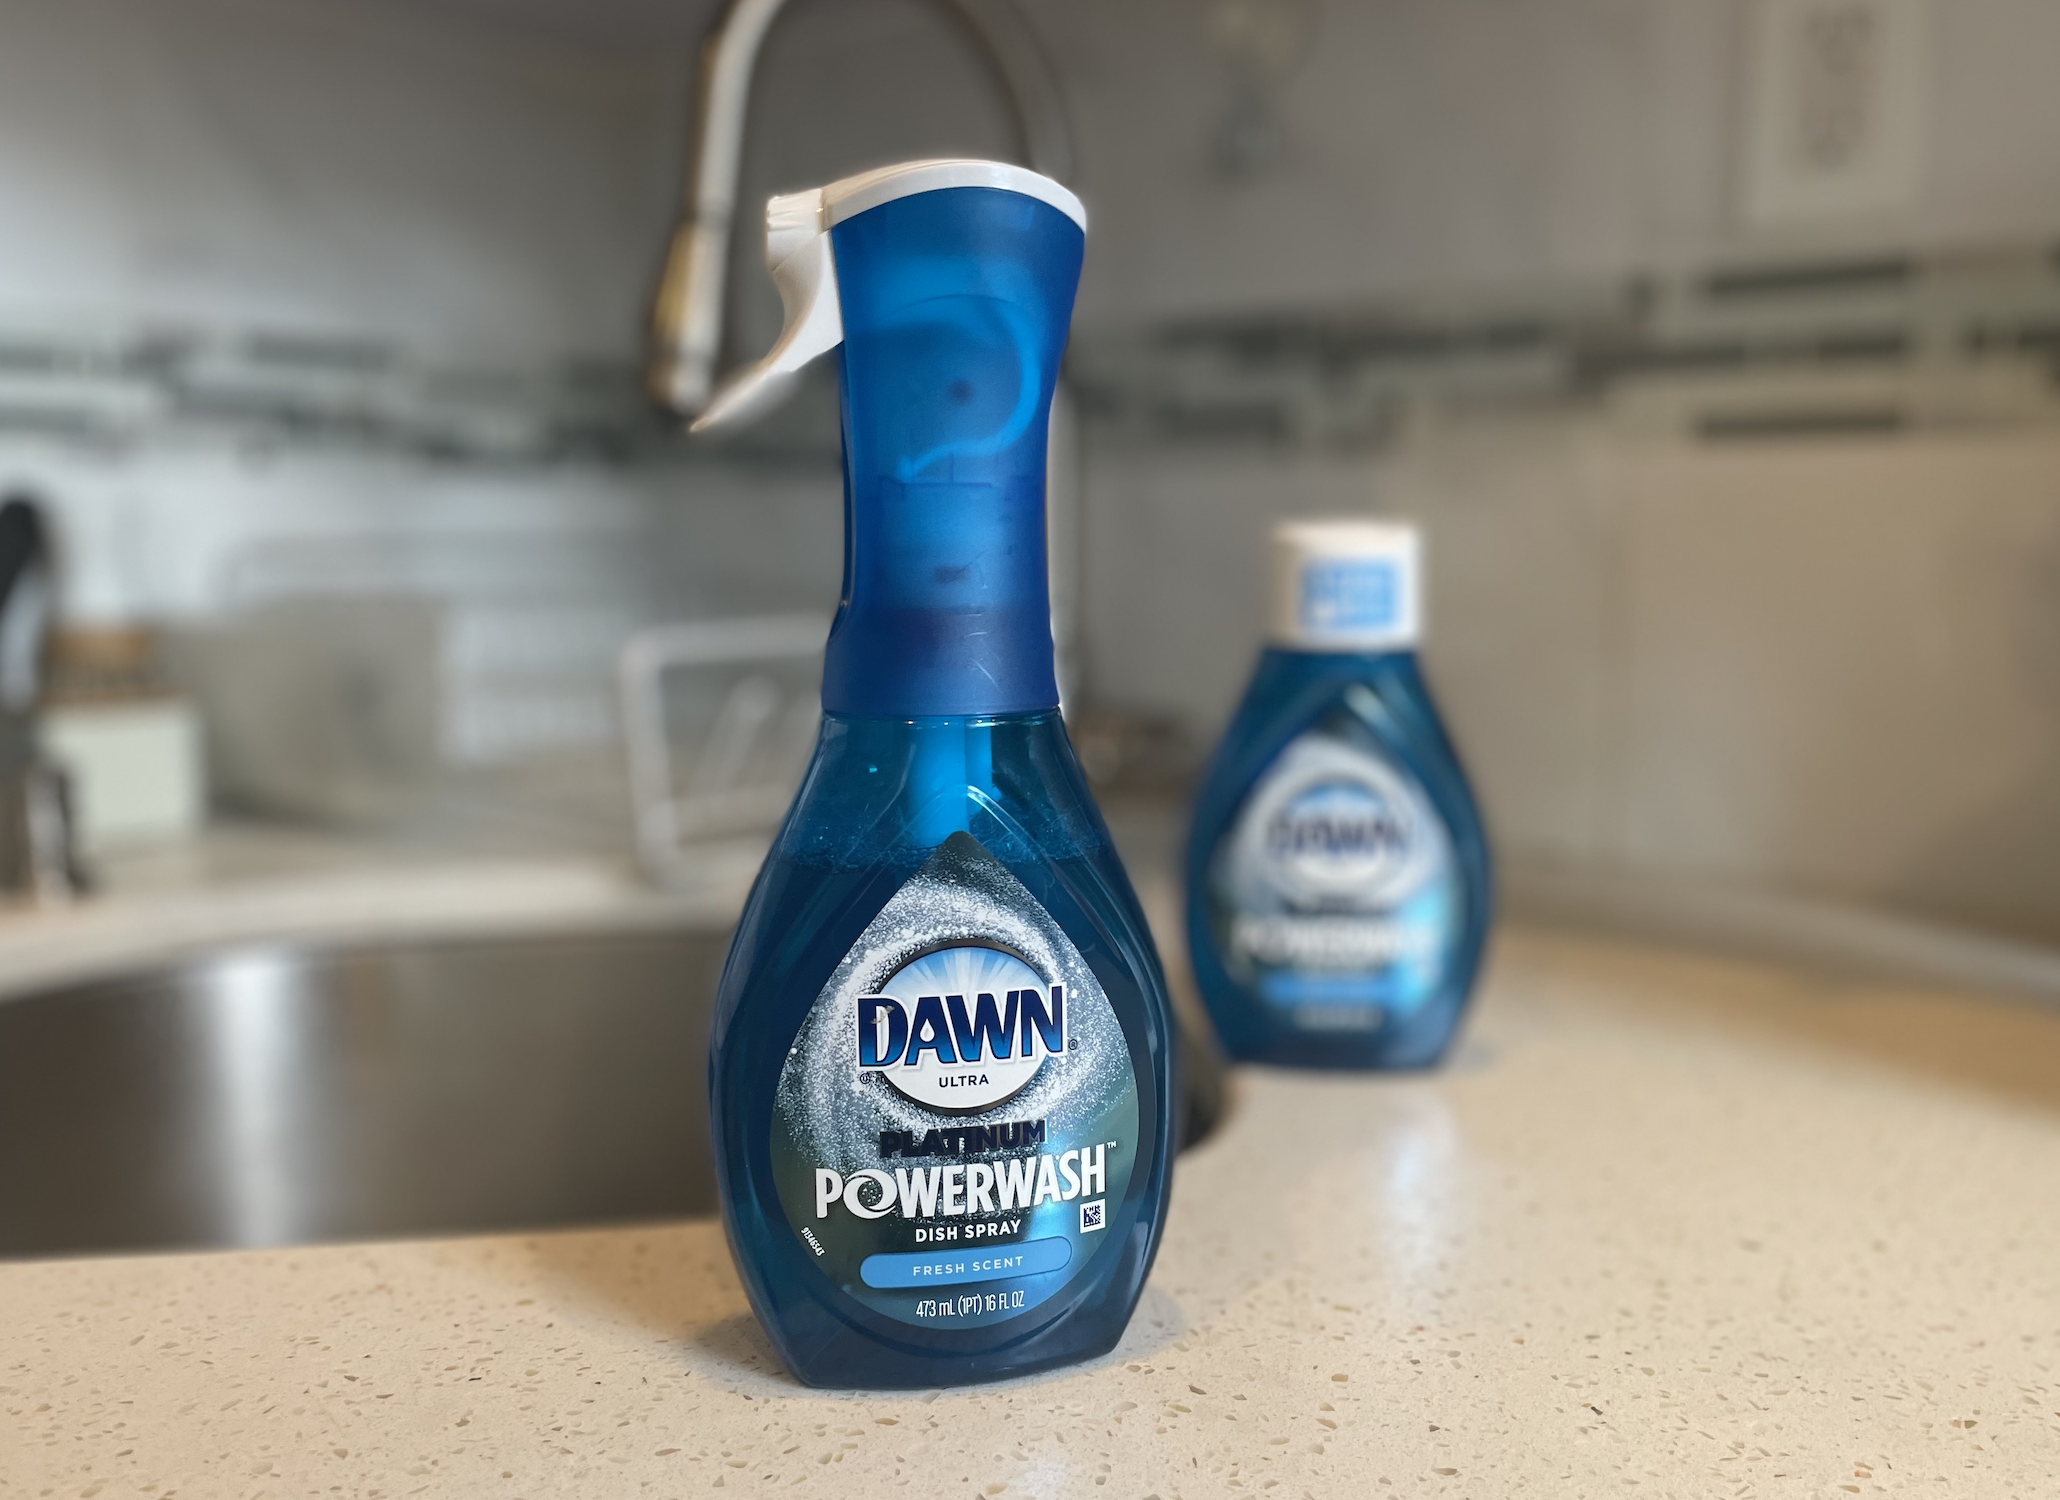 Throw Out Your Primitive Dish Soap and Use This Genius Stuff Instead - CNET